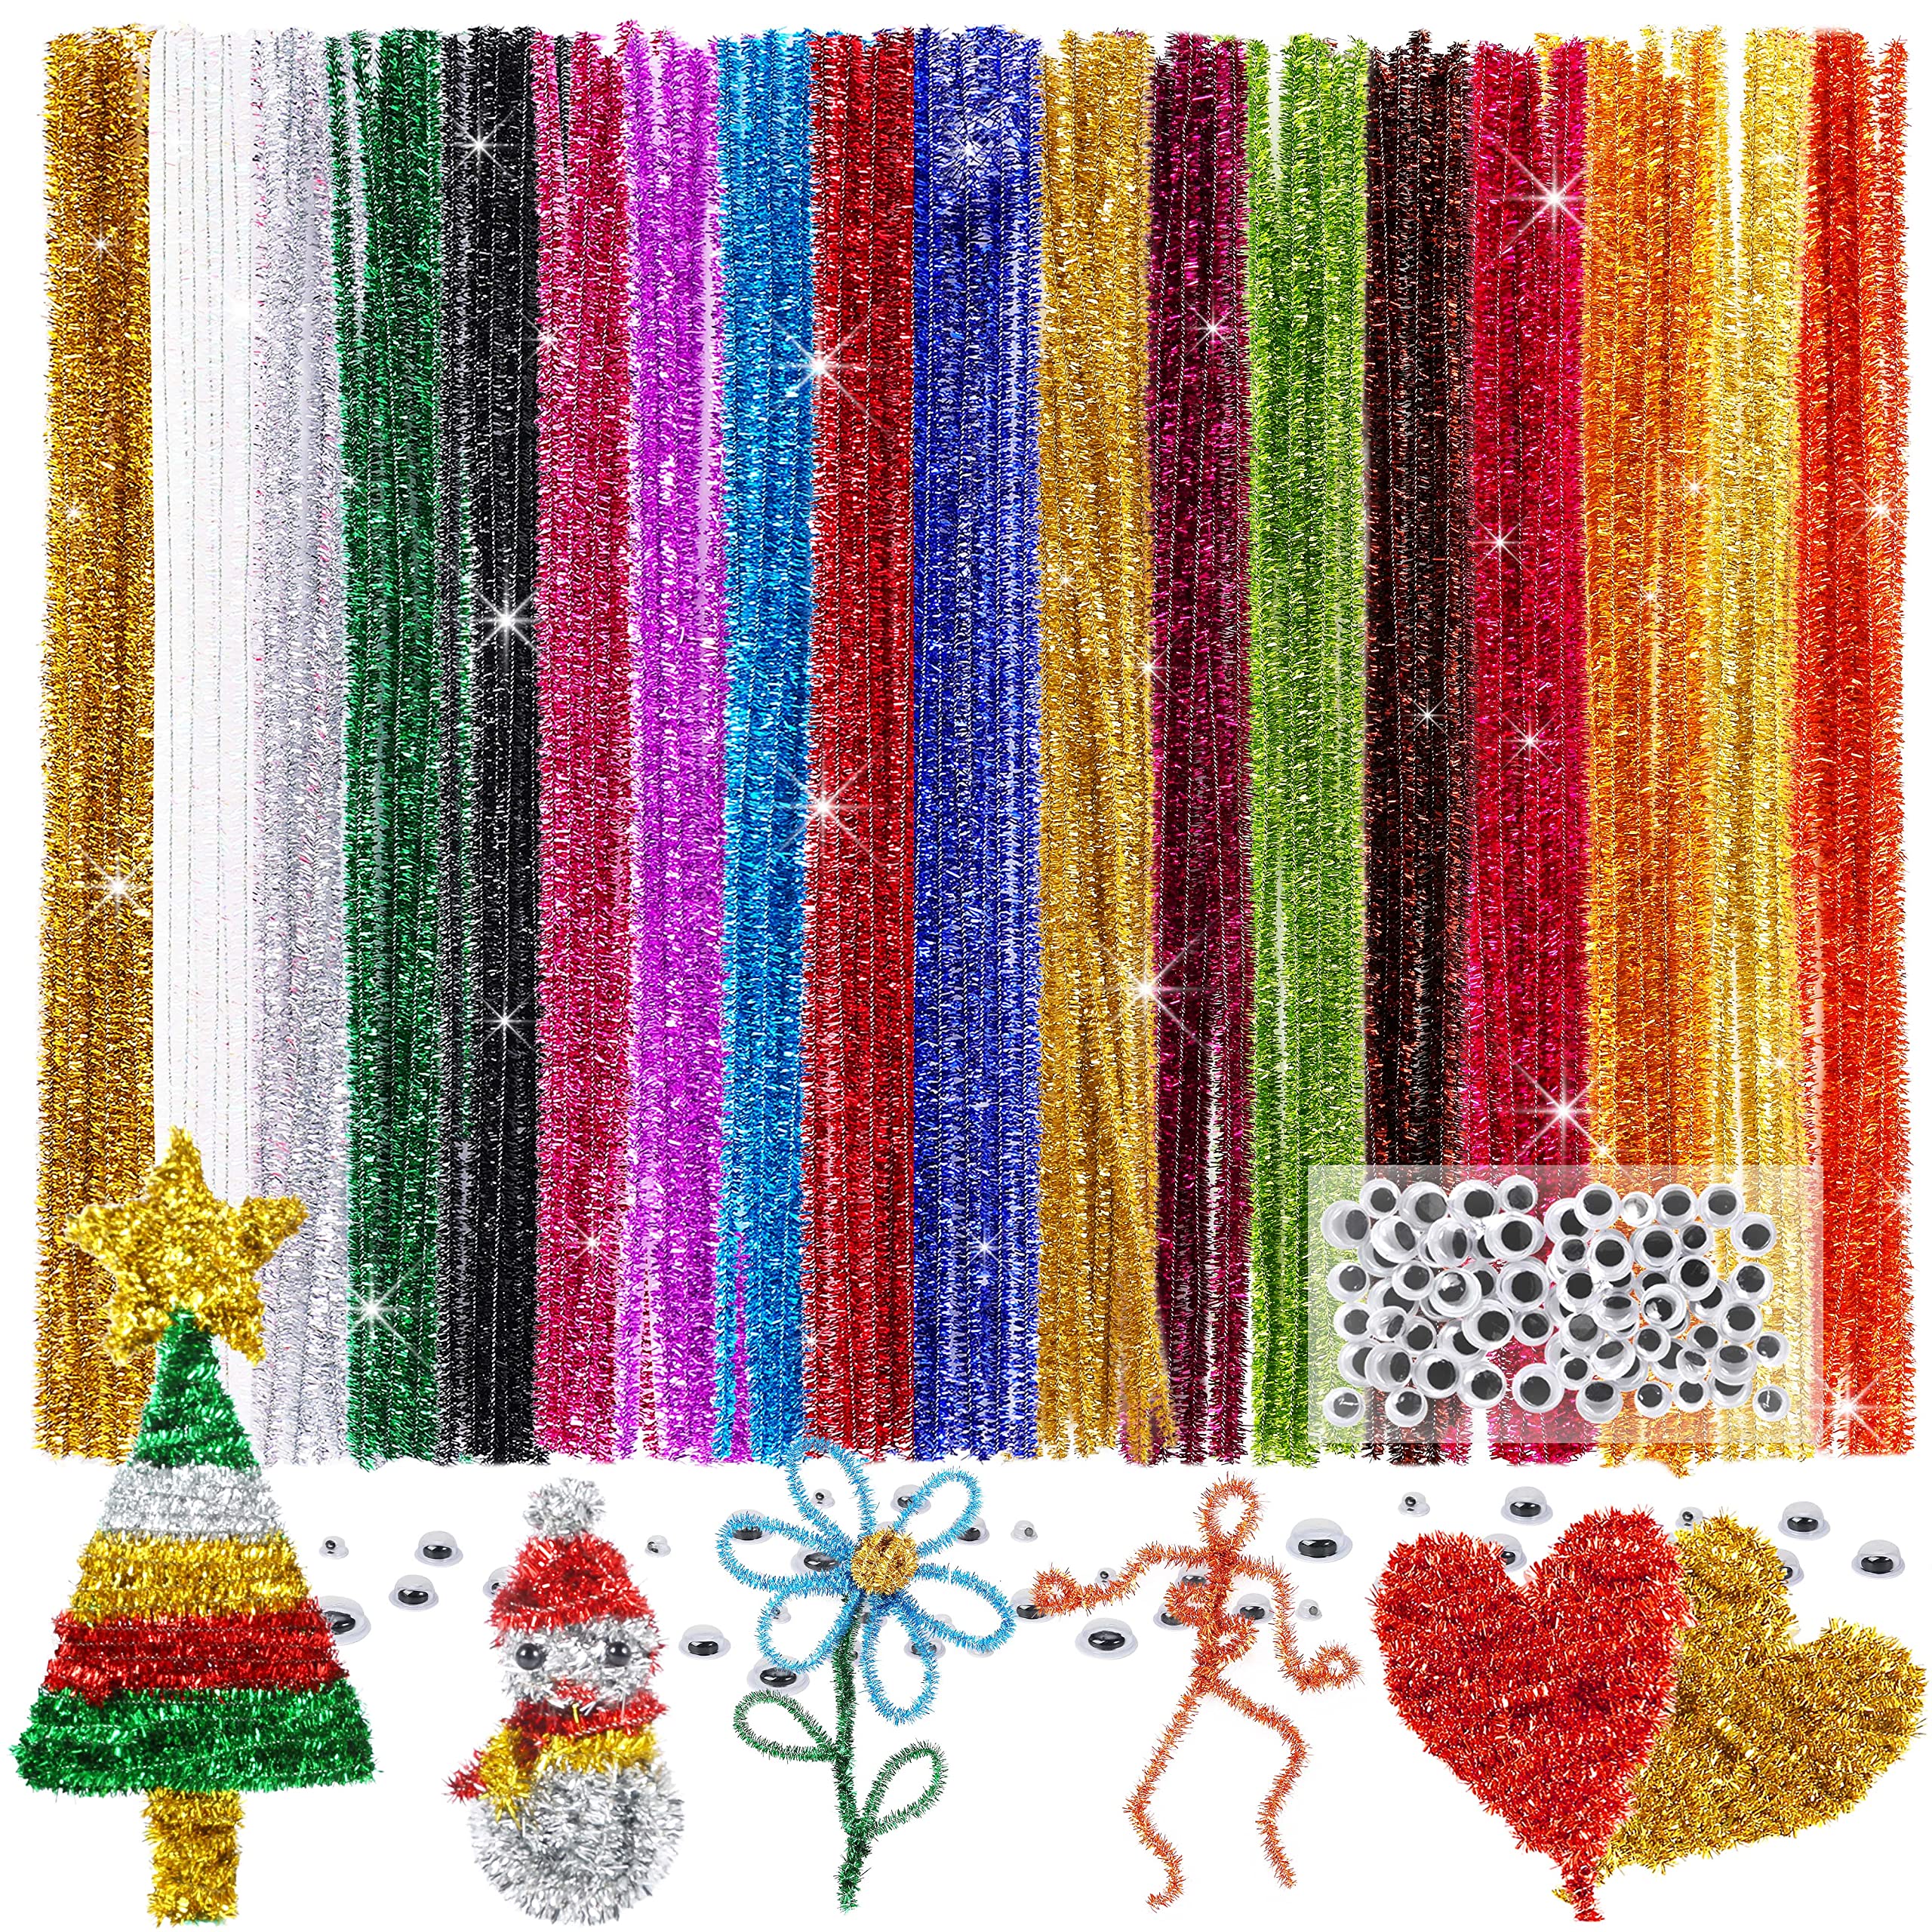 200+200) Arts And Crafts Supplies, Including 200 Pipe Cleaners And